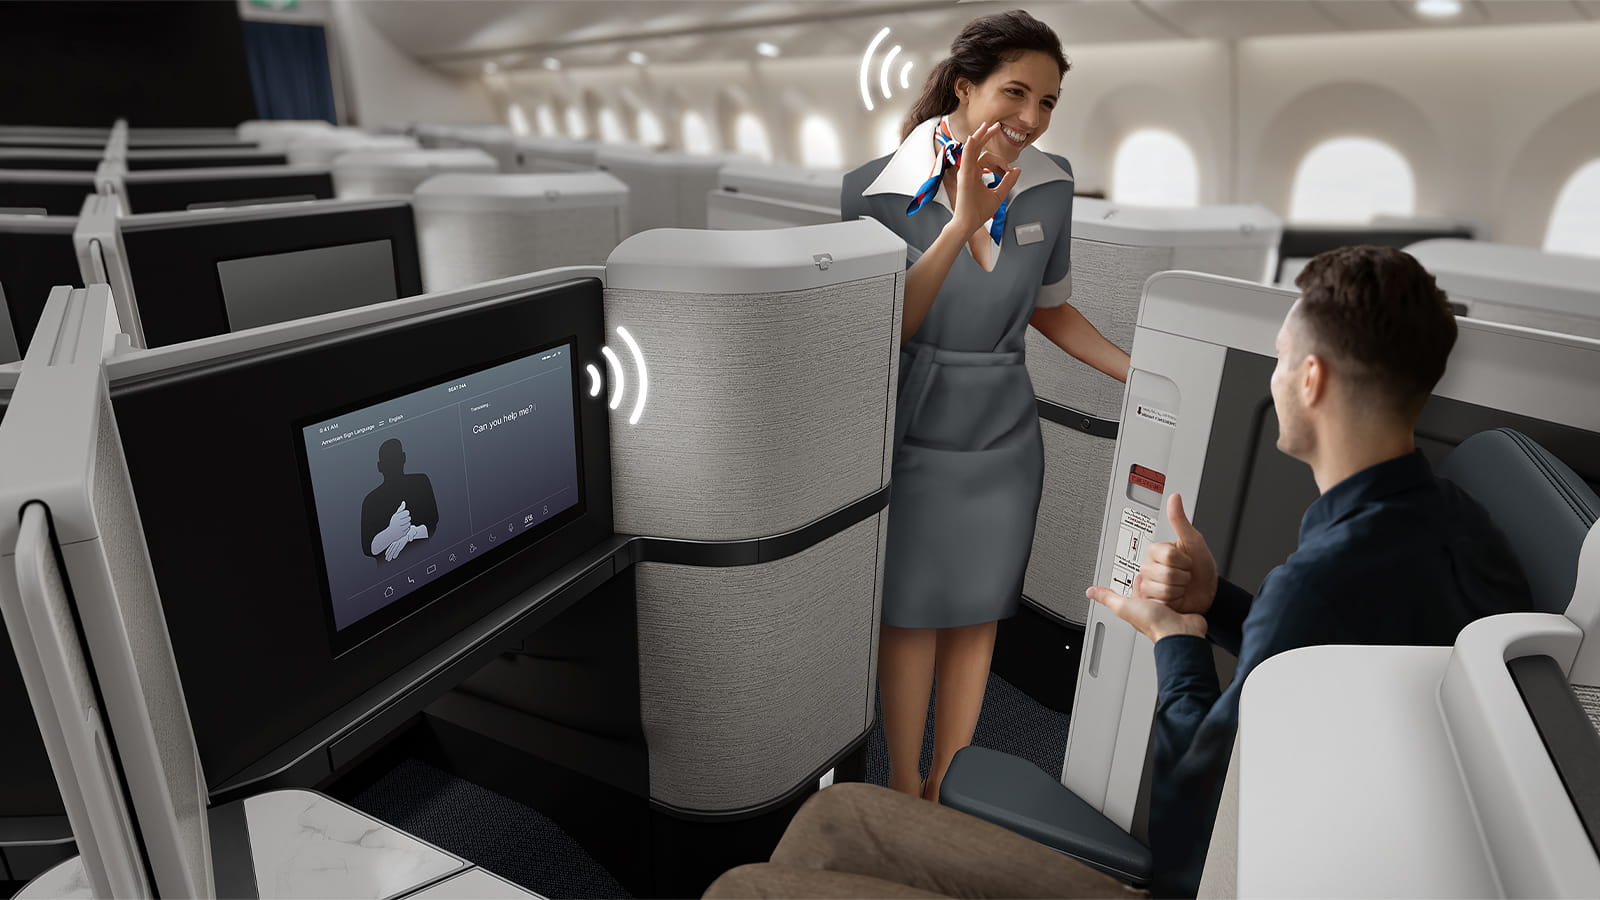 Personal electronic devices serve as the central controller of the ADAPT™ application, enabling passengers of all abilities greater customization and agency over their inflight experience.